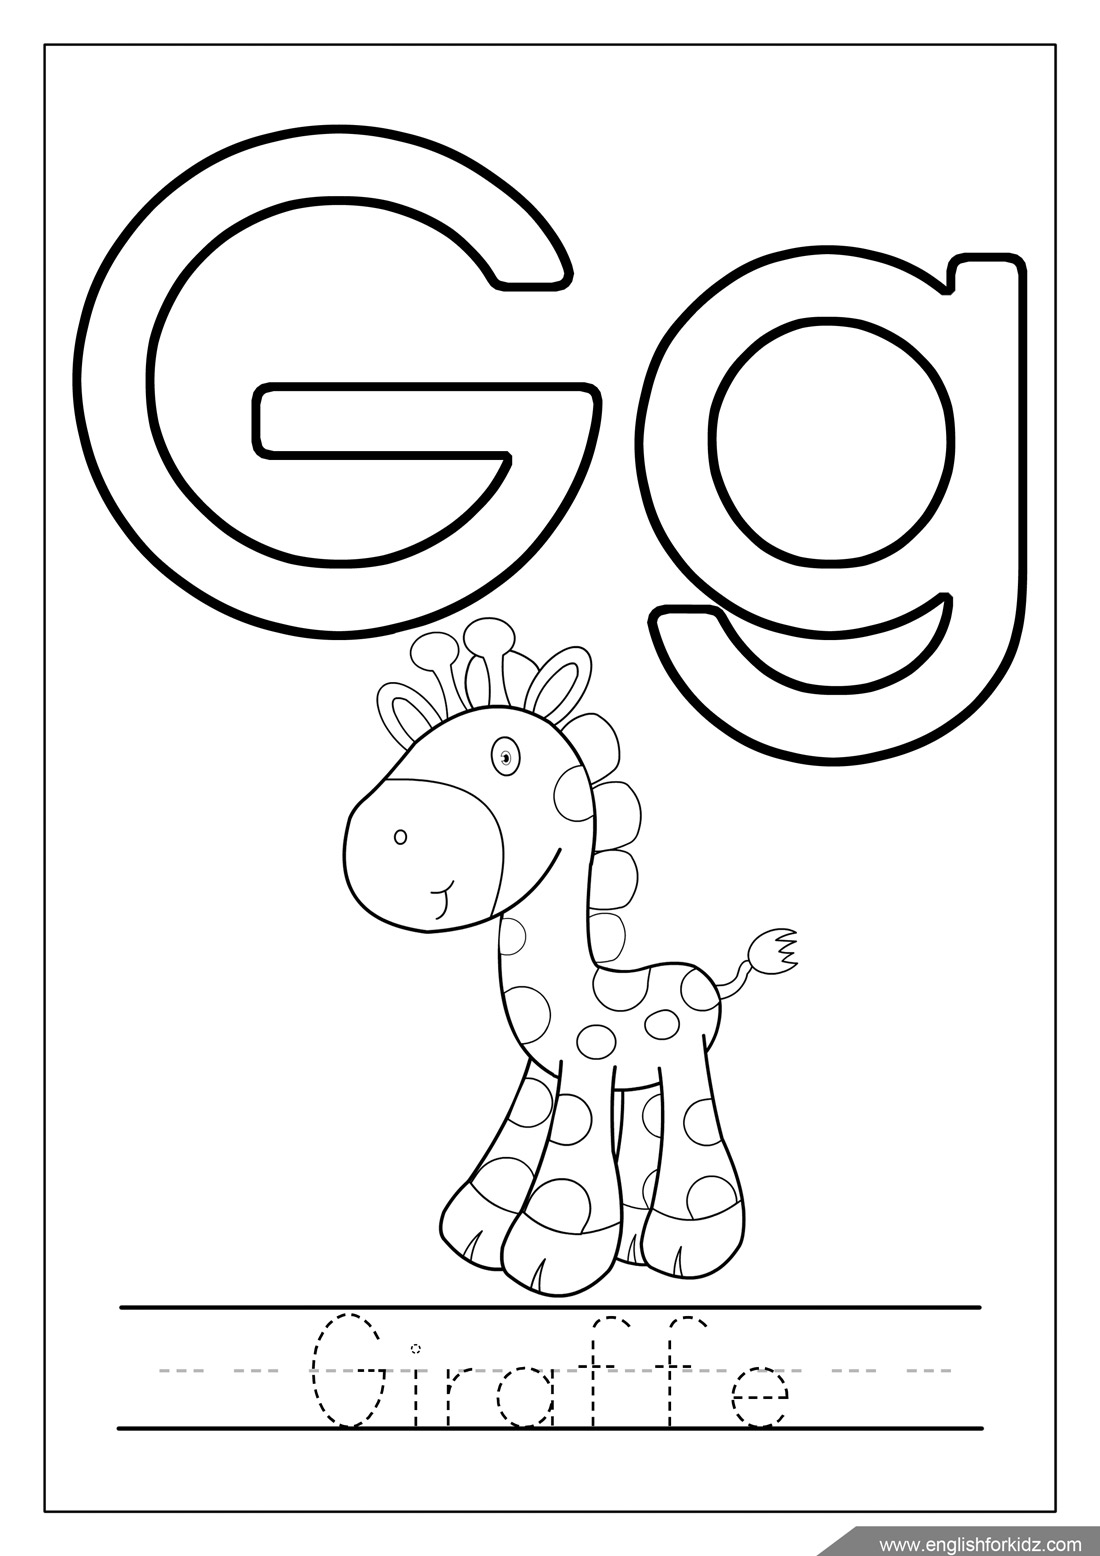 English for kids step by step letter g worksheets flash cards coloring pages